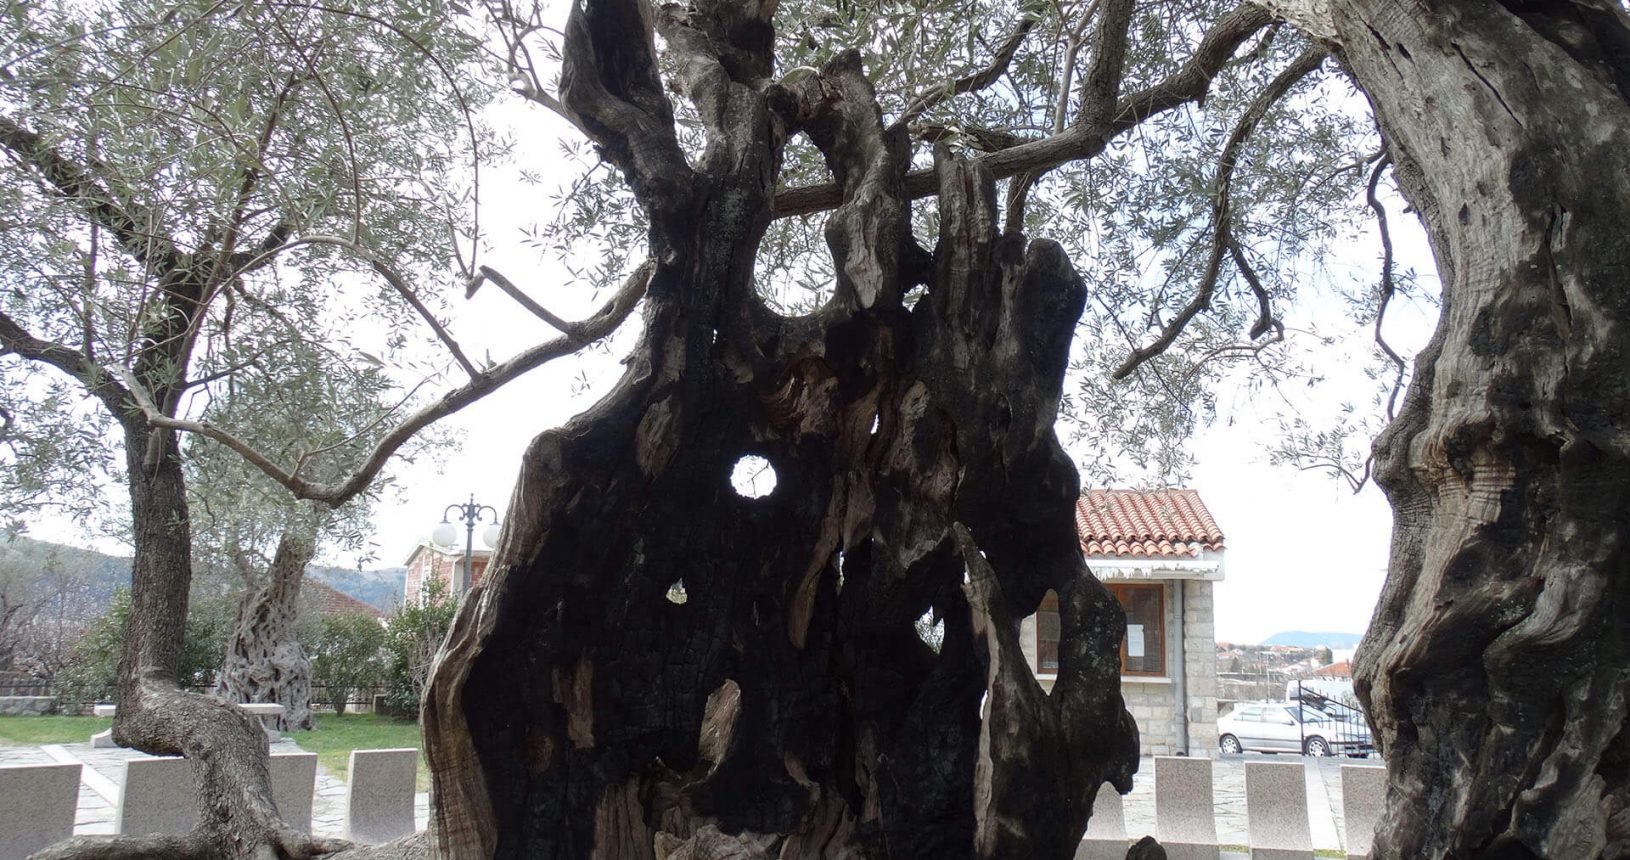 Some branches of Old Olive Tree are dead